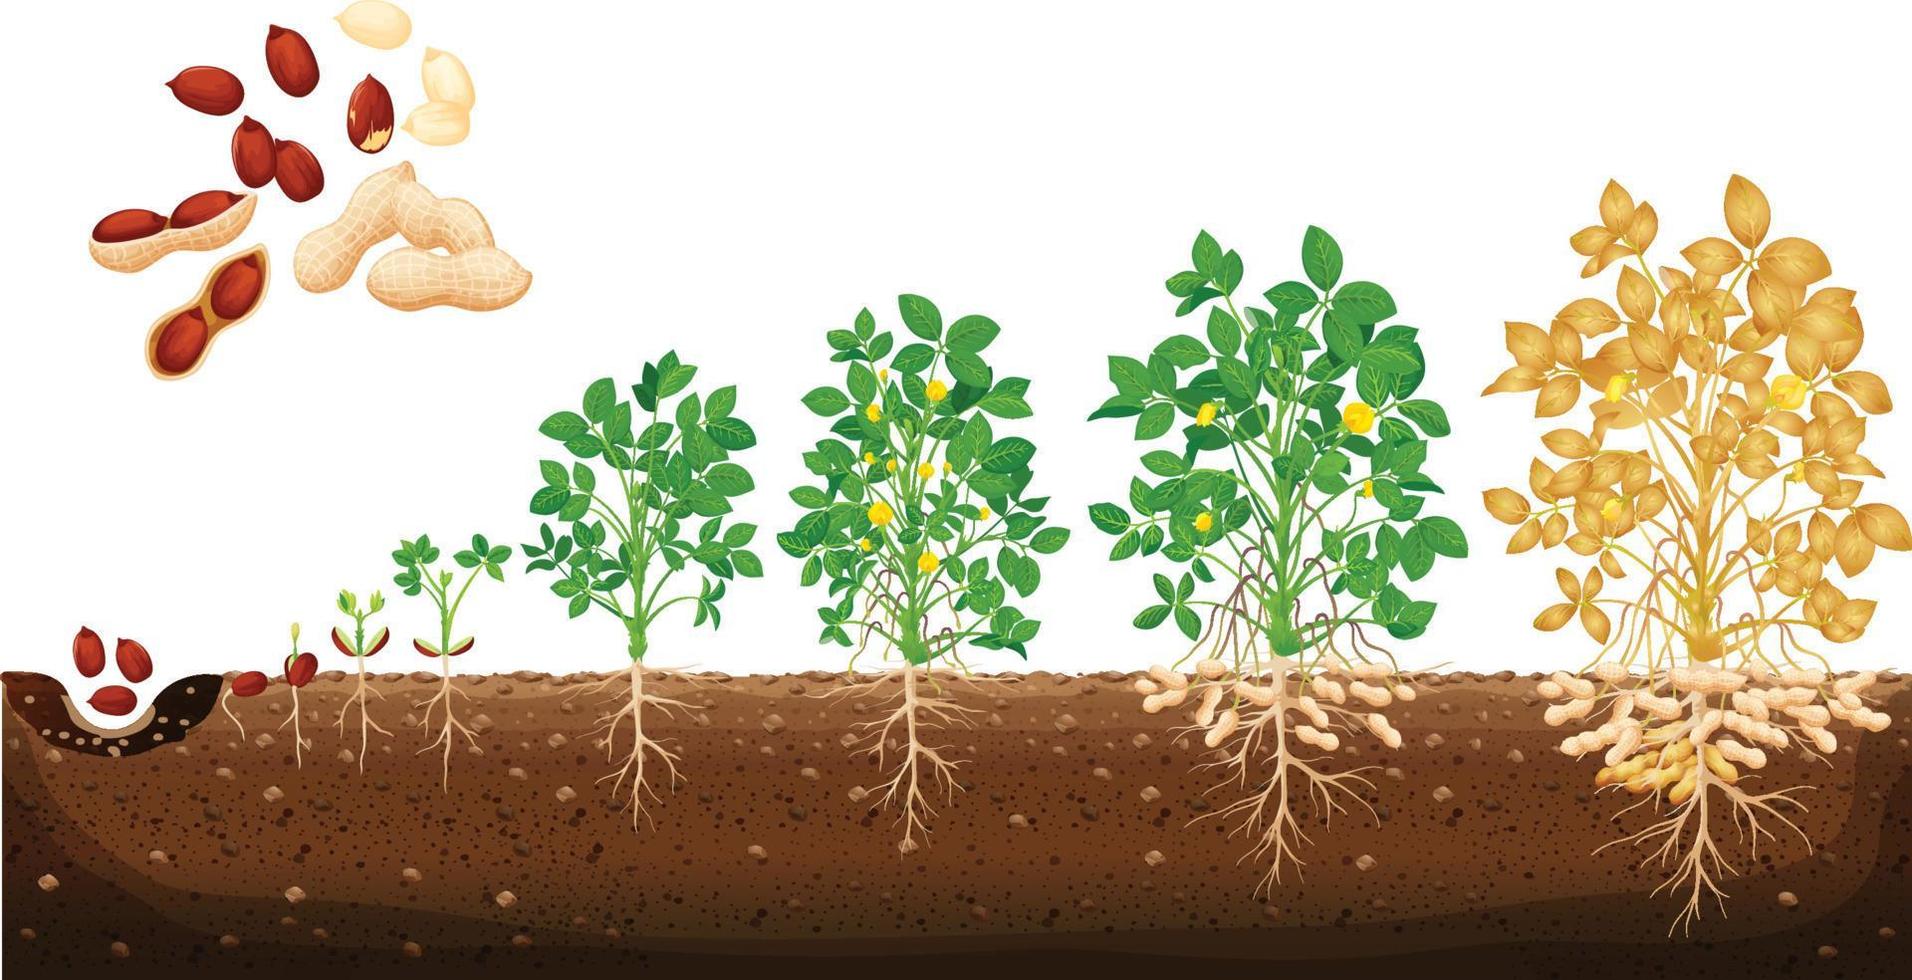 Peanut growing stages vector illustration in flat design. A cycle of growth of a plant of a peanut. Peanut growth stages, vector groundnut timeline. Timeline from grain, seedling, and big plant.